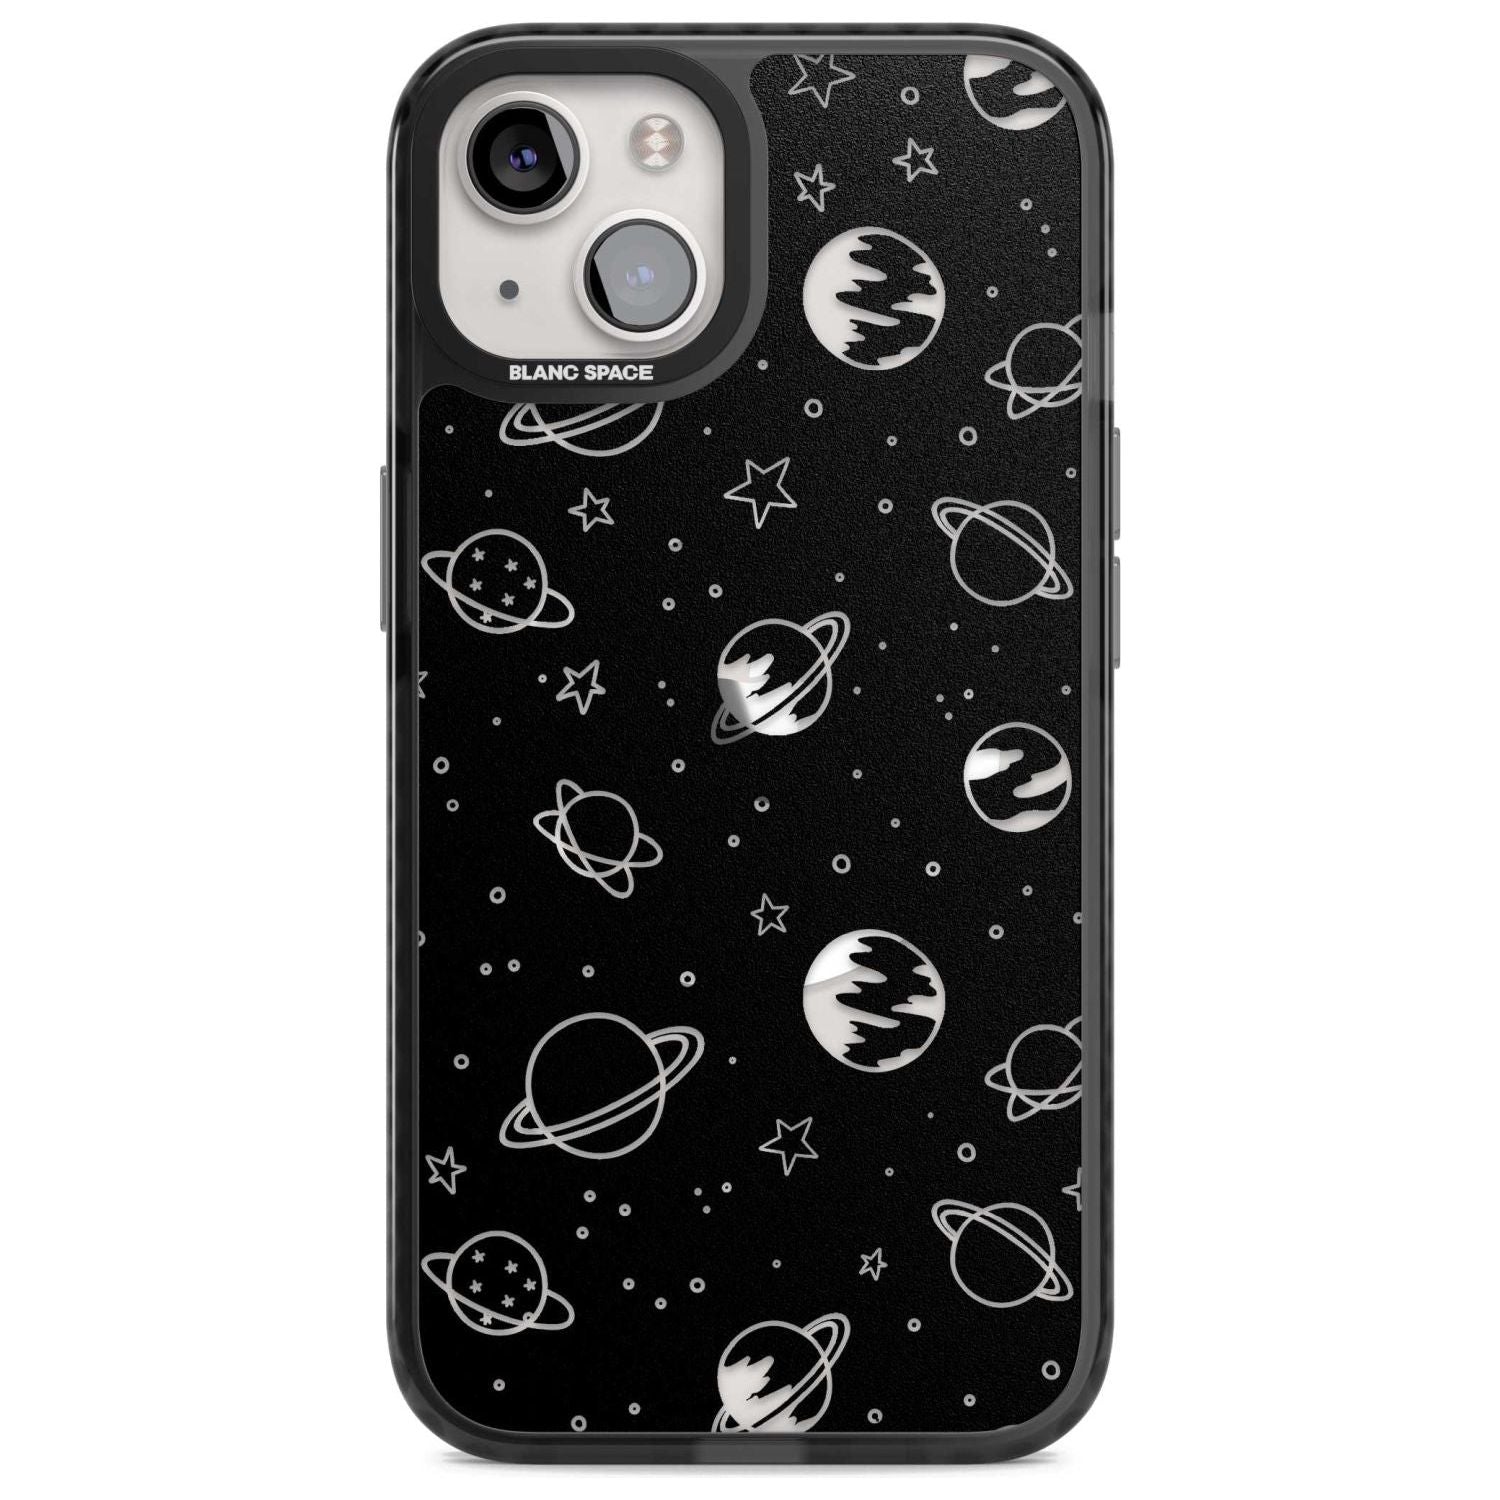 Cosmic Outer Space Design Clear on Black Phone Case iPhone 15 Plus / Magsafe Black Impact Case,iPhone 15 / Magsafe Black Impact Case,iPhone 14 Plus / Magsafe Black Impact Case,iPhone 14 / Magsafe Black Impact Case,iPhone 13 / Magsafe Black Impact Case Blanc Space